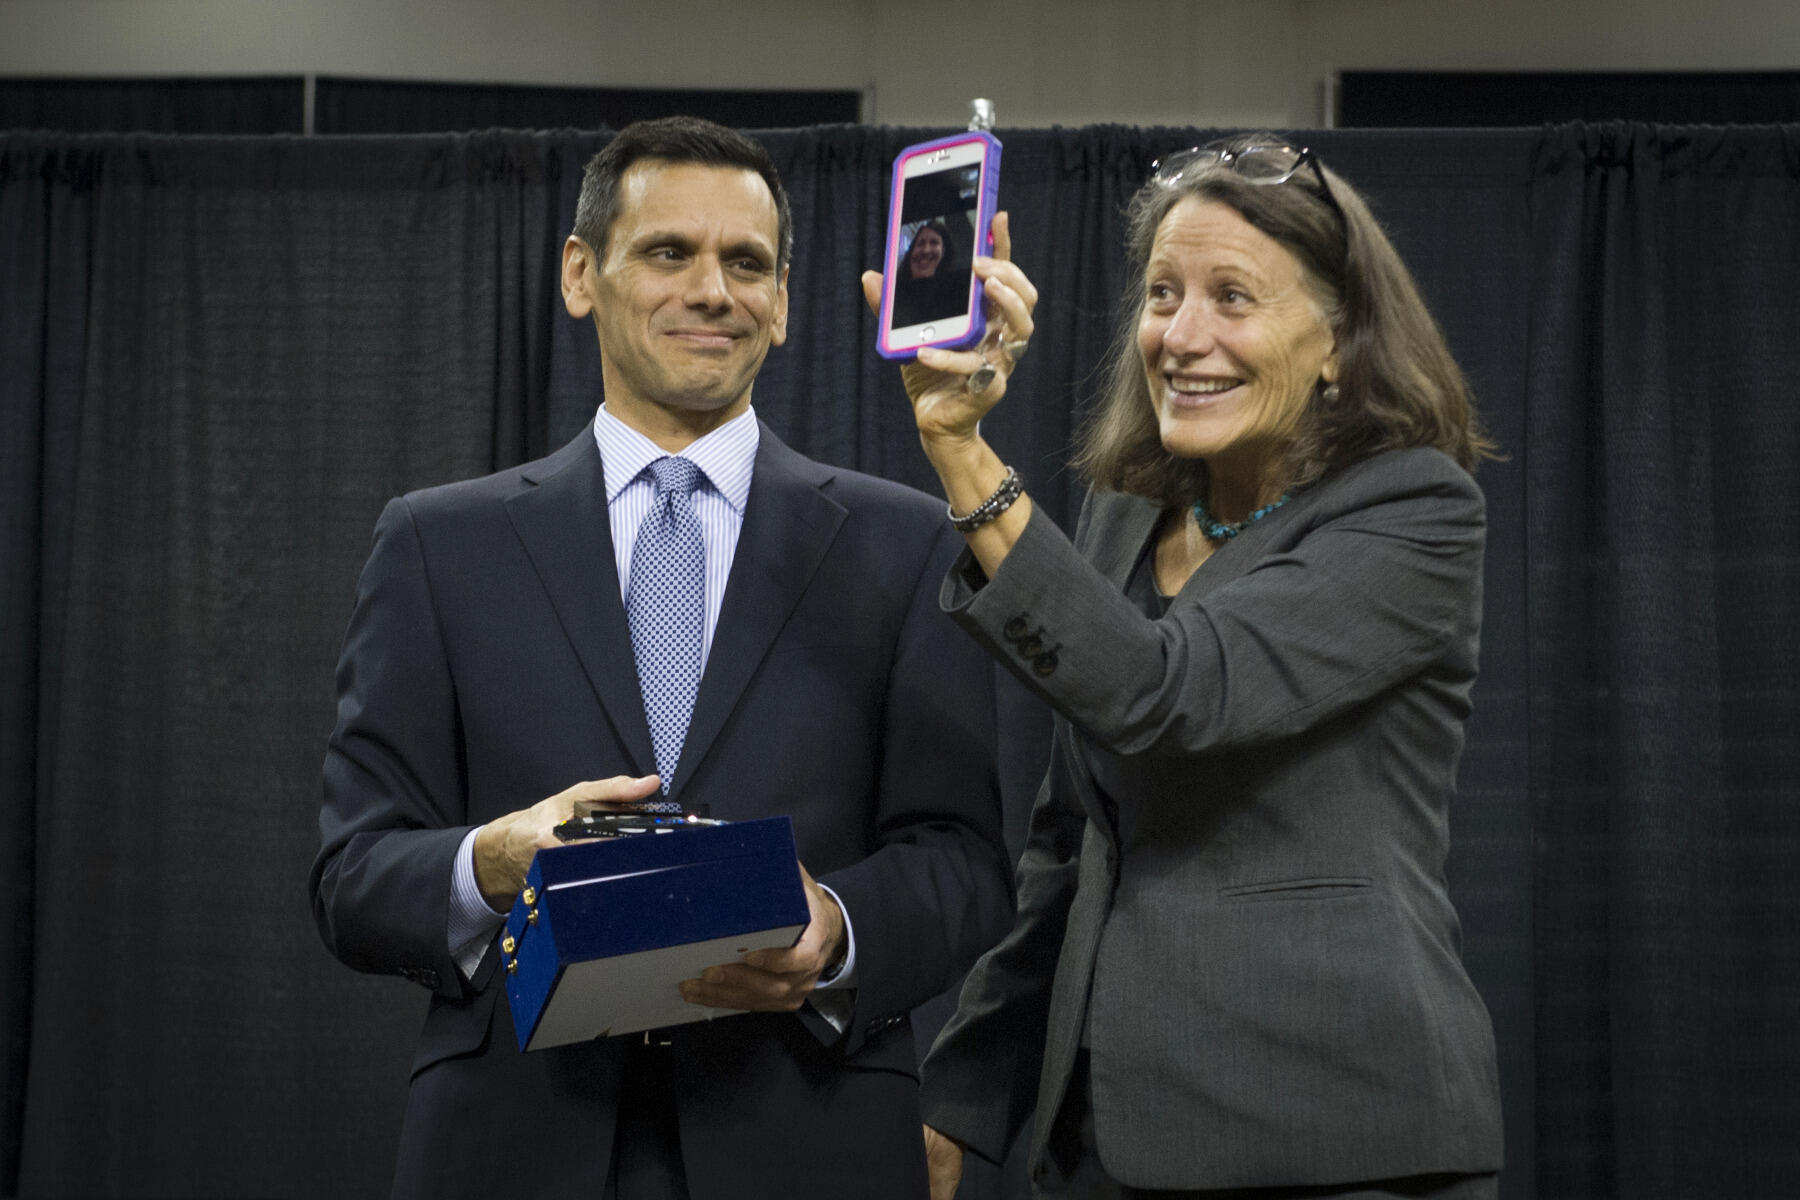 Dr. Rao presents the President’s Outstanding Achievement Award to Kathryn Murphy-Judy, accepting on behalf of Lisa Yamin. Yamin was in Atlanta to receive the National Advising Certificate of Merit Award, but joined the ceremony via video chat.